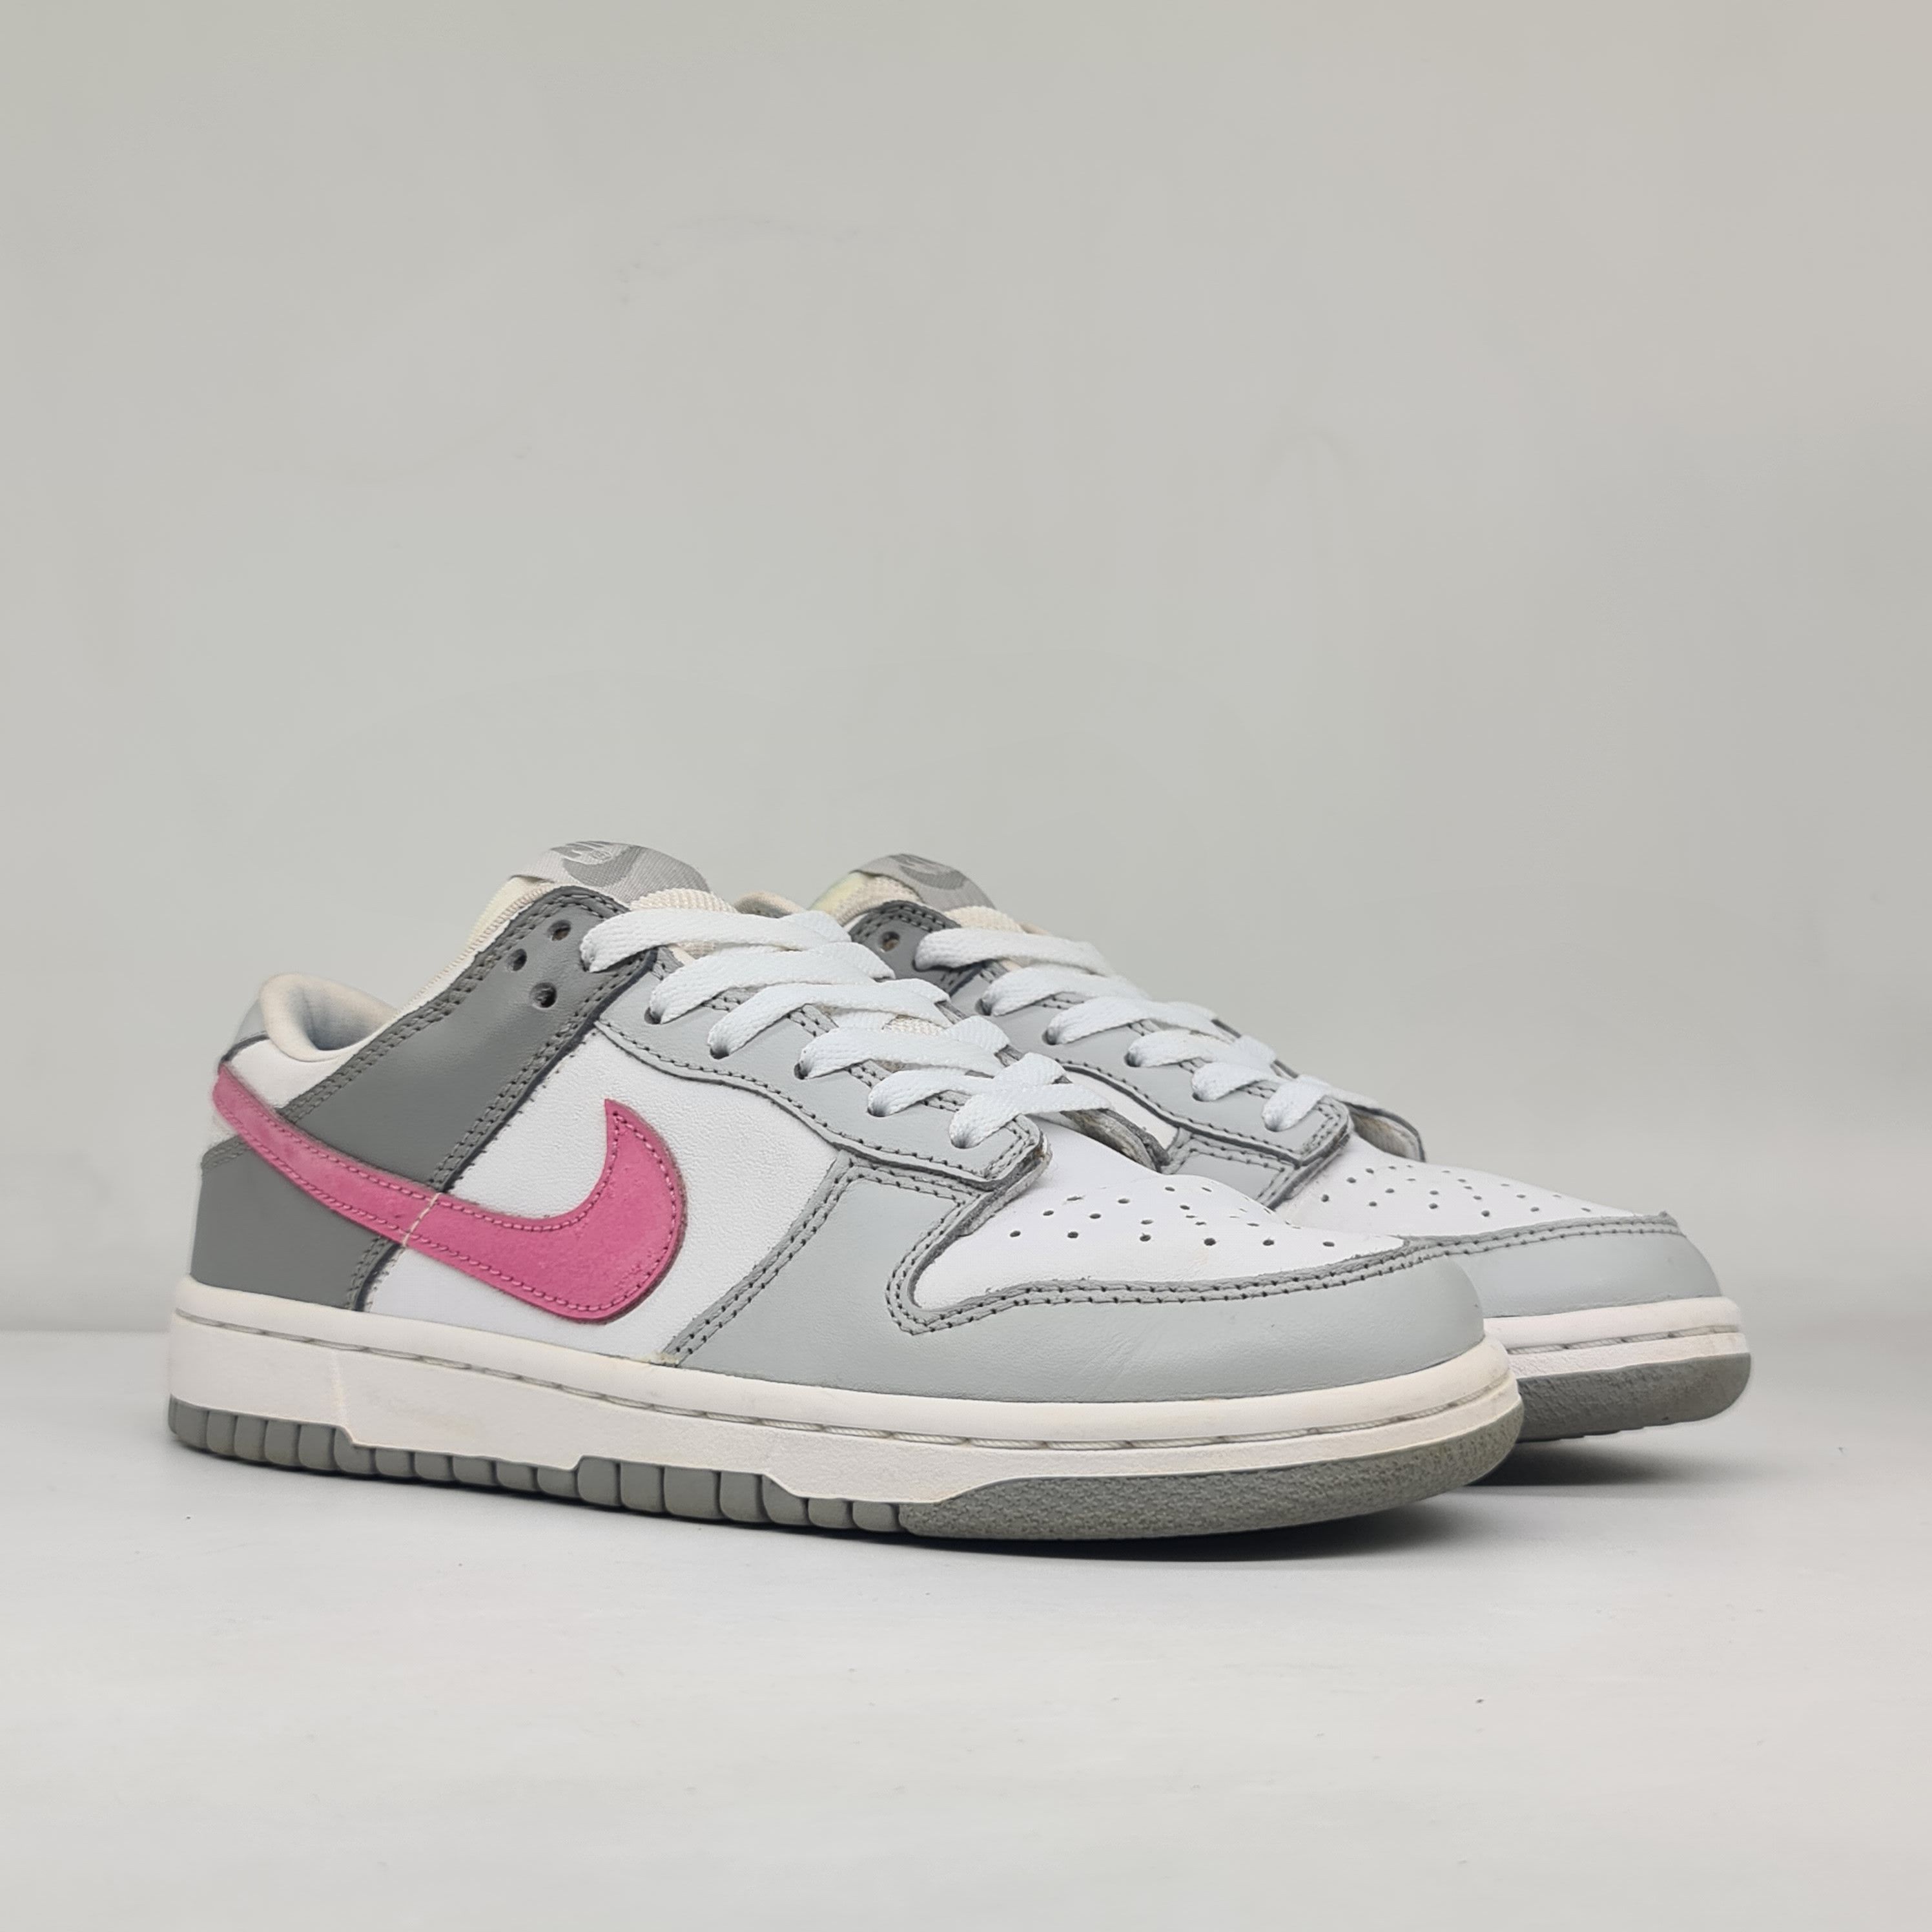 Nike - 2004 W's Dunk Low Pro Pink Neutral Gray - 1